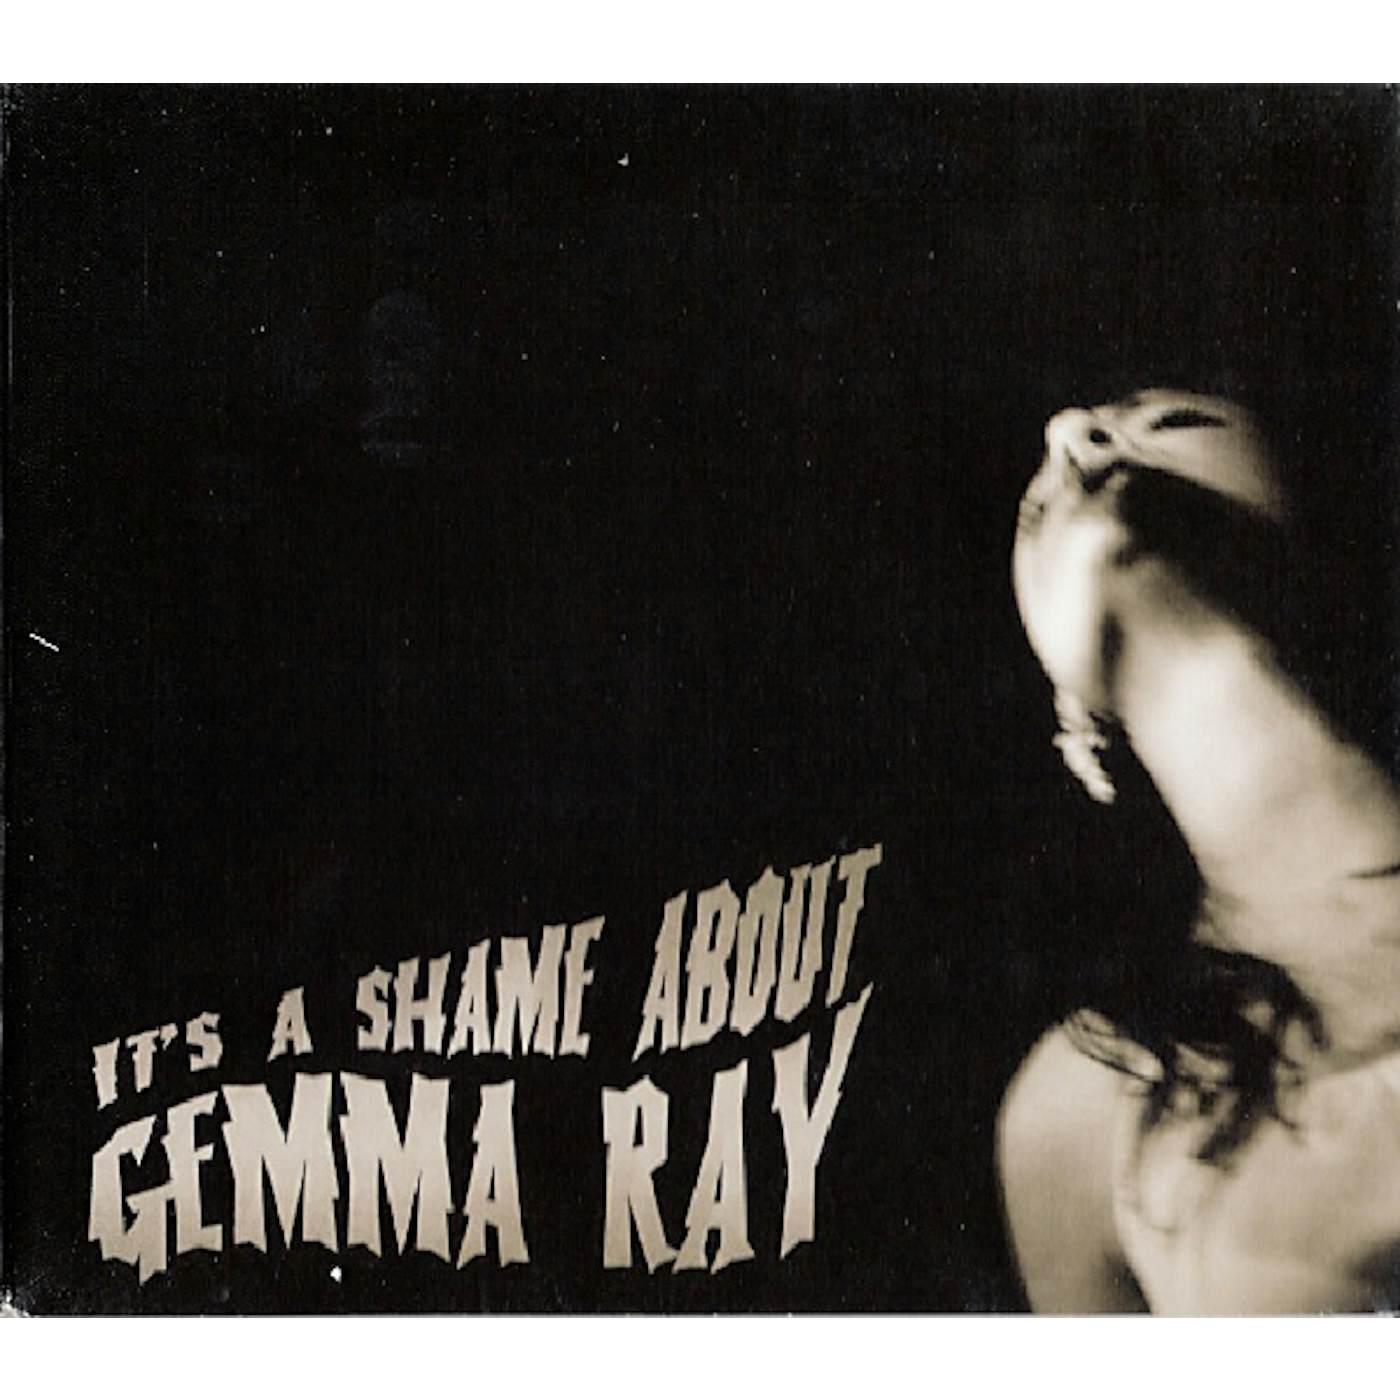 It's A Shame About Gemma Ray Vinyl Record